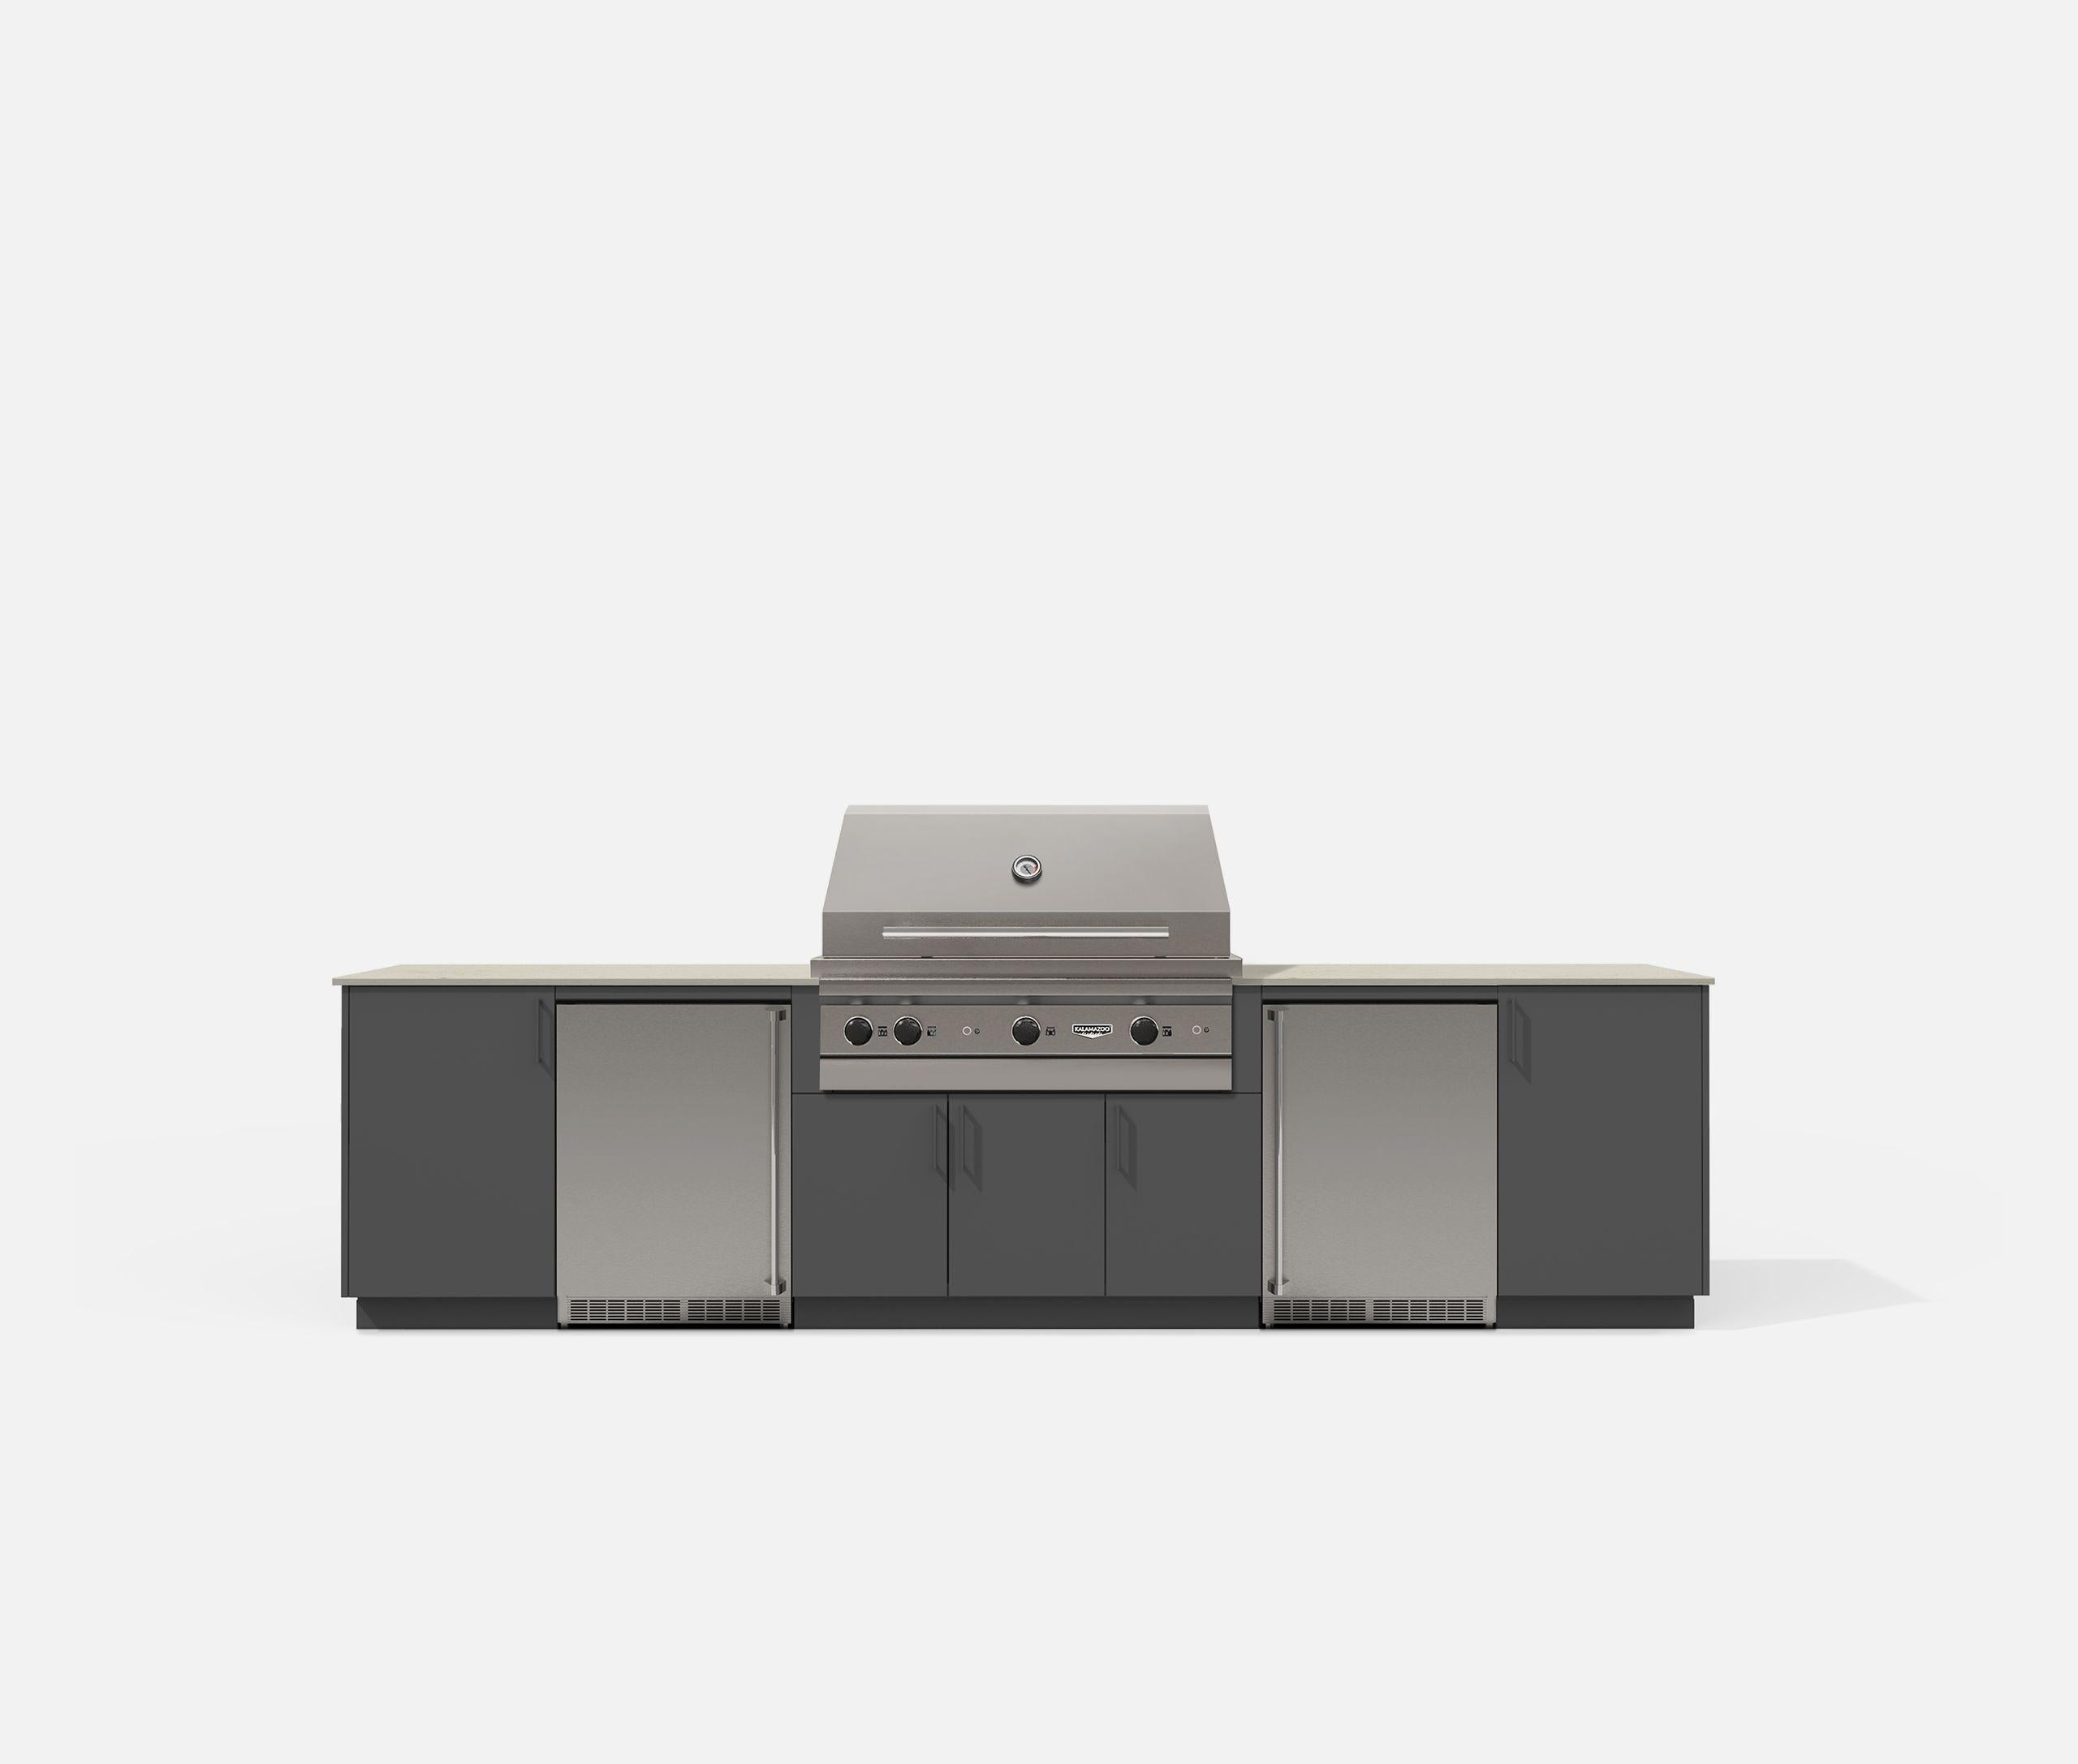 Urban Bonfire CTUNDRA42ANTHRACITE Tundra 42 Outdoor Kitchen (Anthracite) GRILL SOLD SEPARATELY